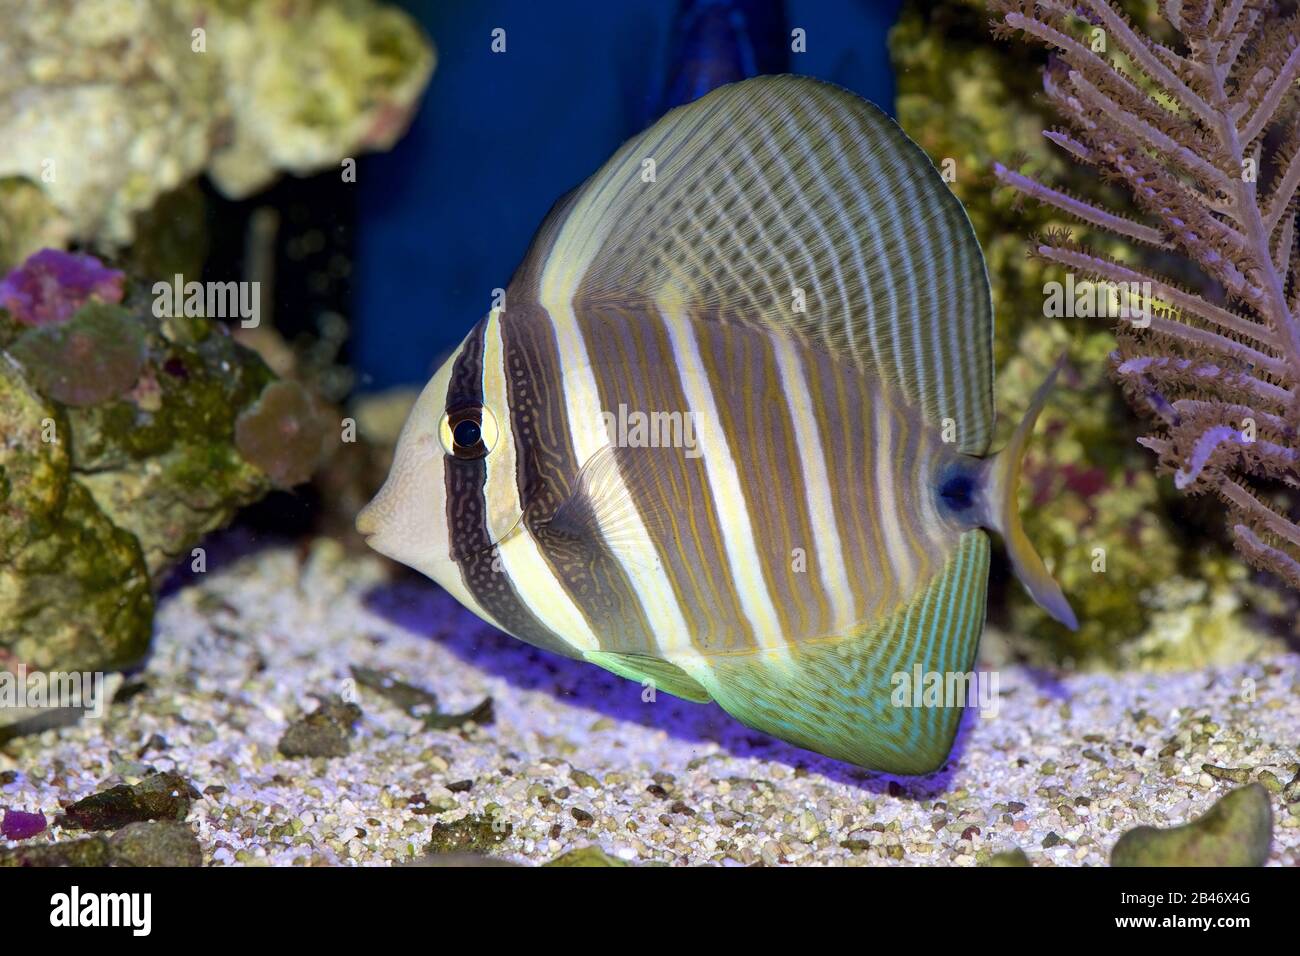 Pacific Sailfin Tang, Zebrasoma veliferum, in a reef setting Stock Photo